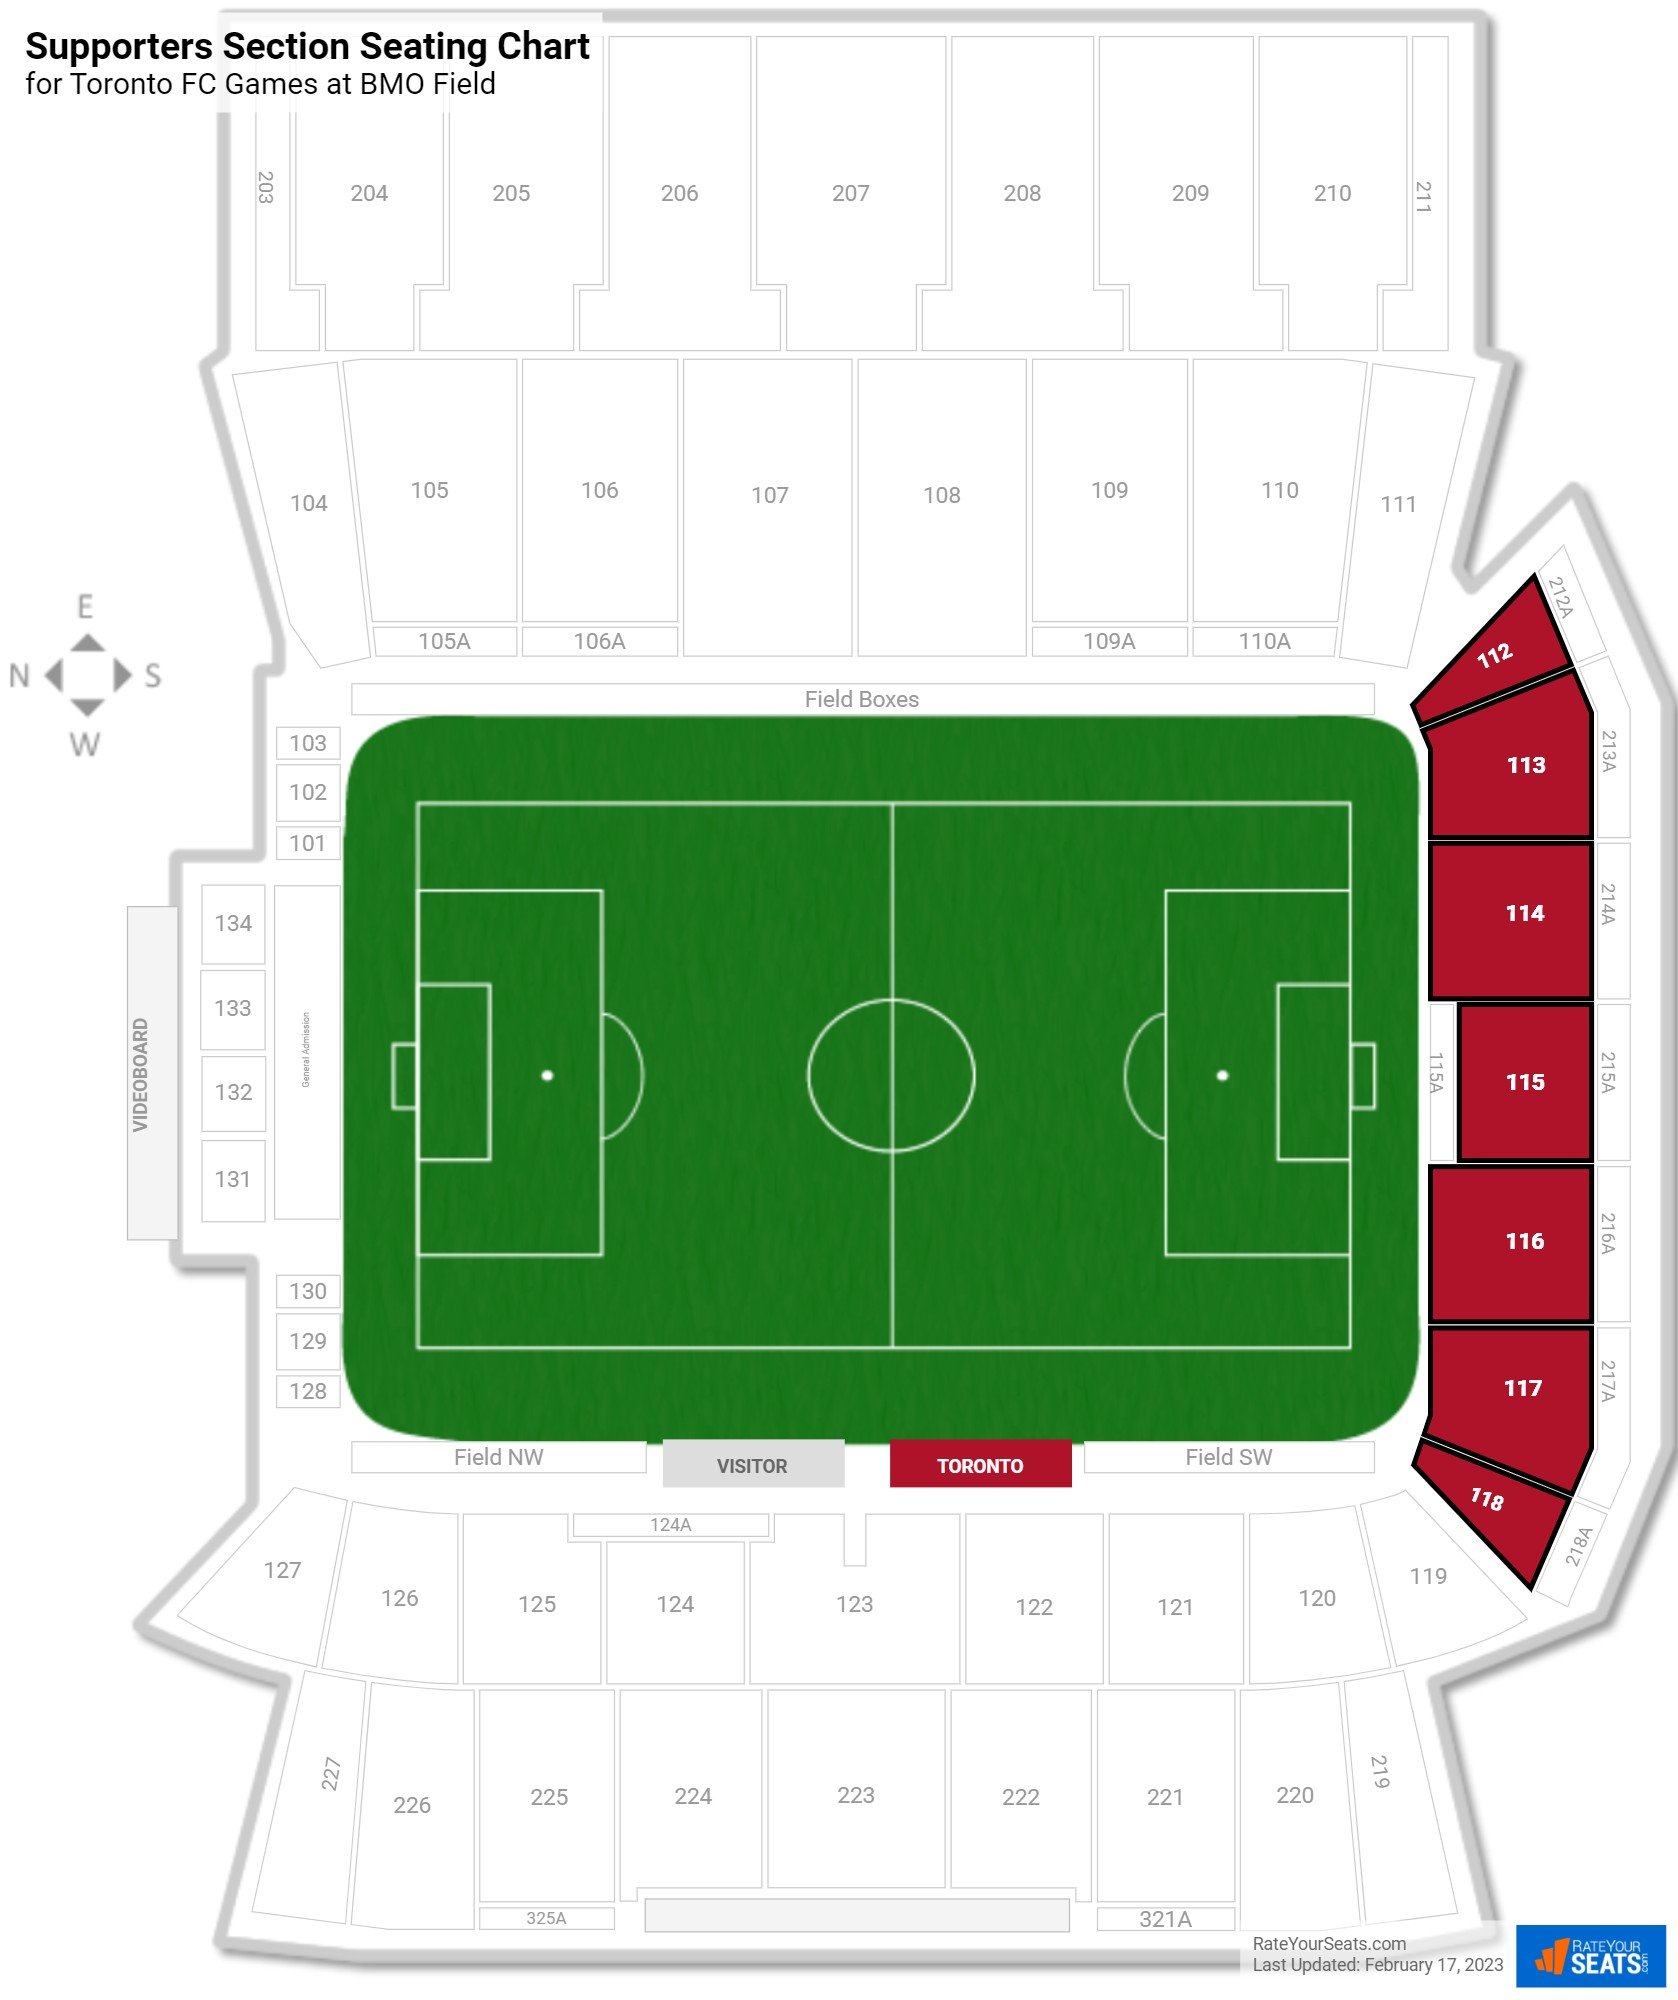 Toronto FC Supporters Section Seating Chart at BMO Field